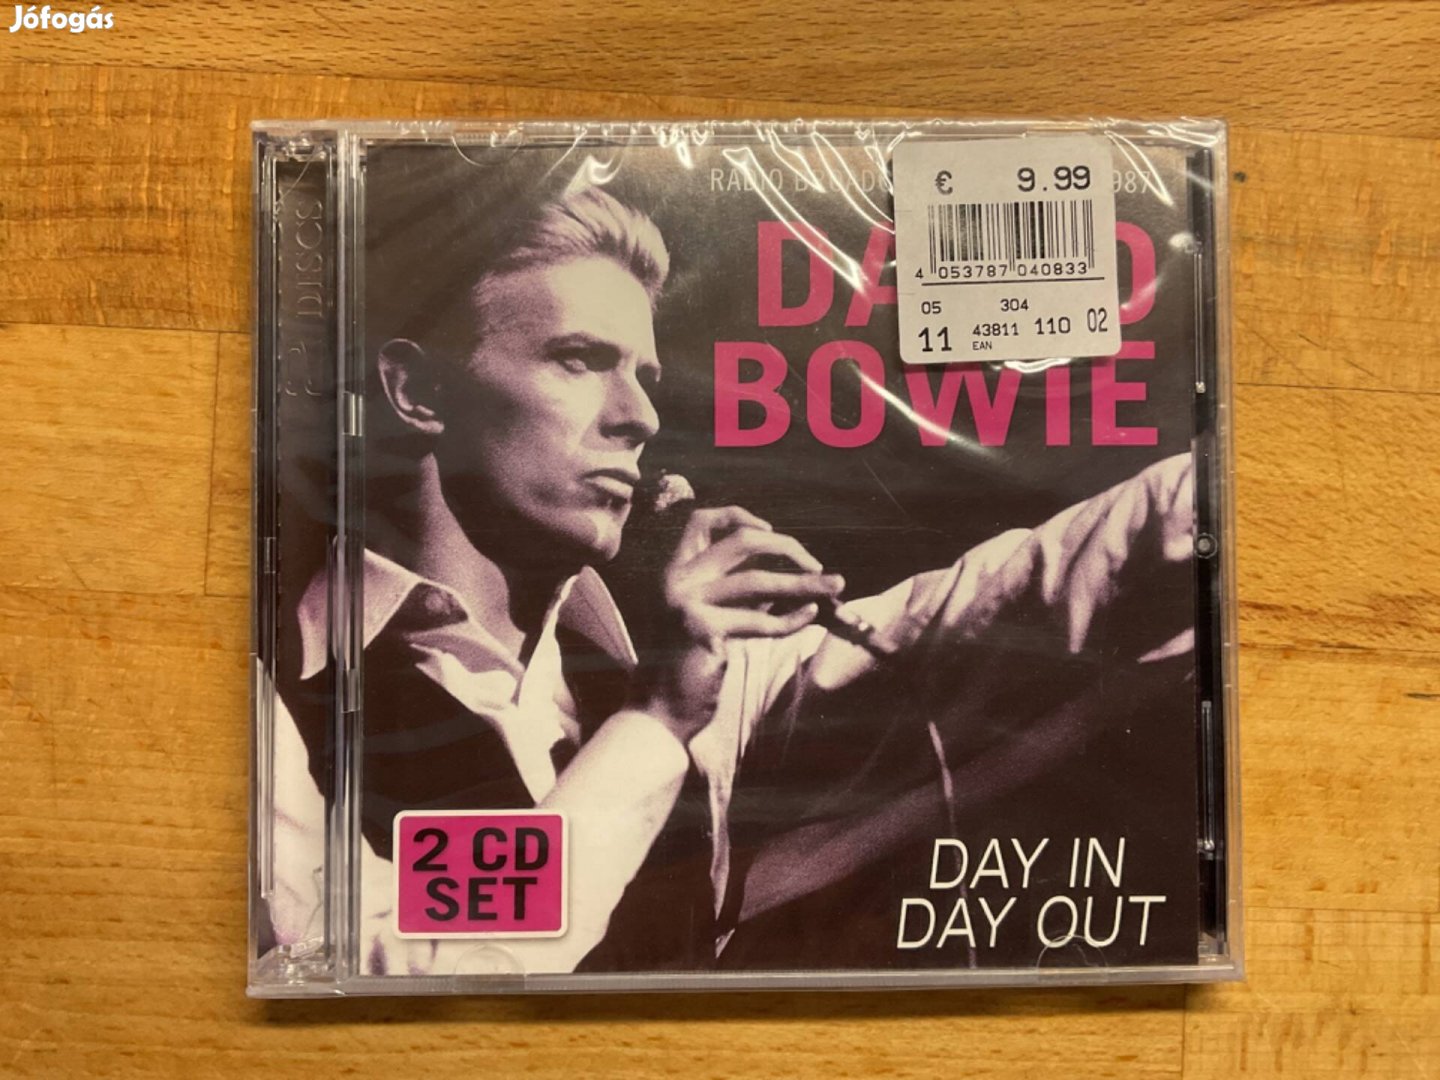 David Bowie - Day In Day Out, új dupla cd album